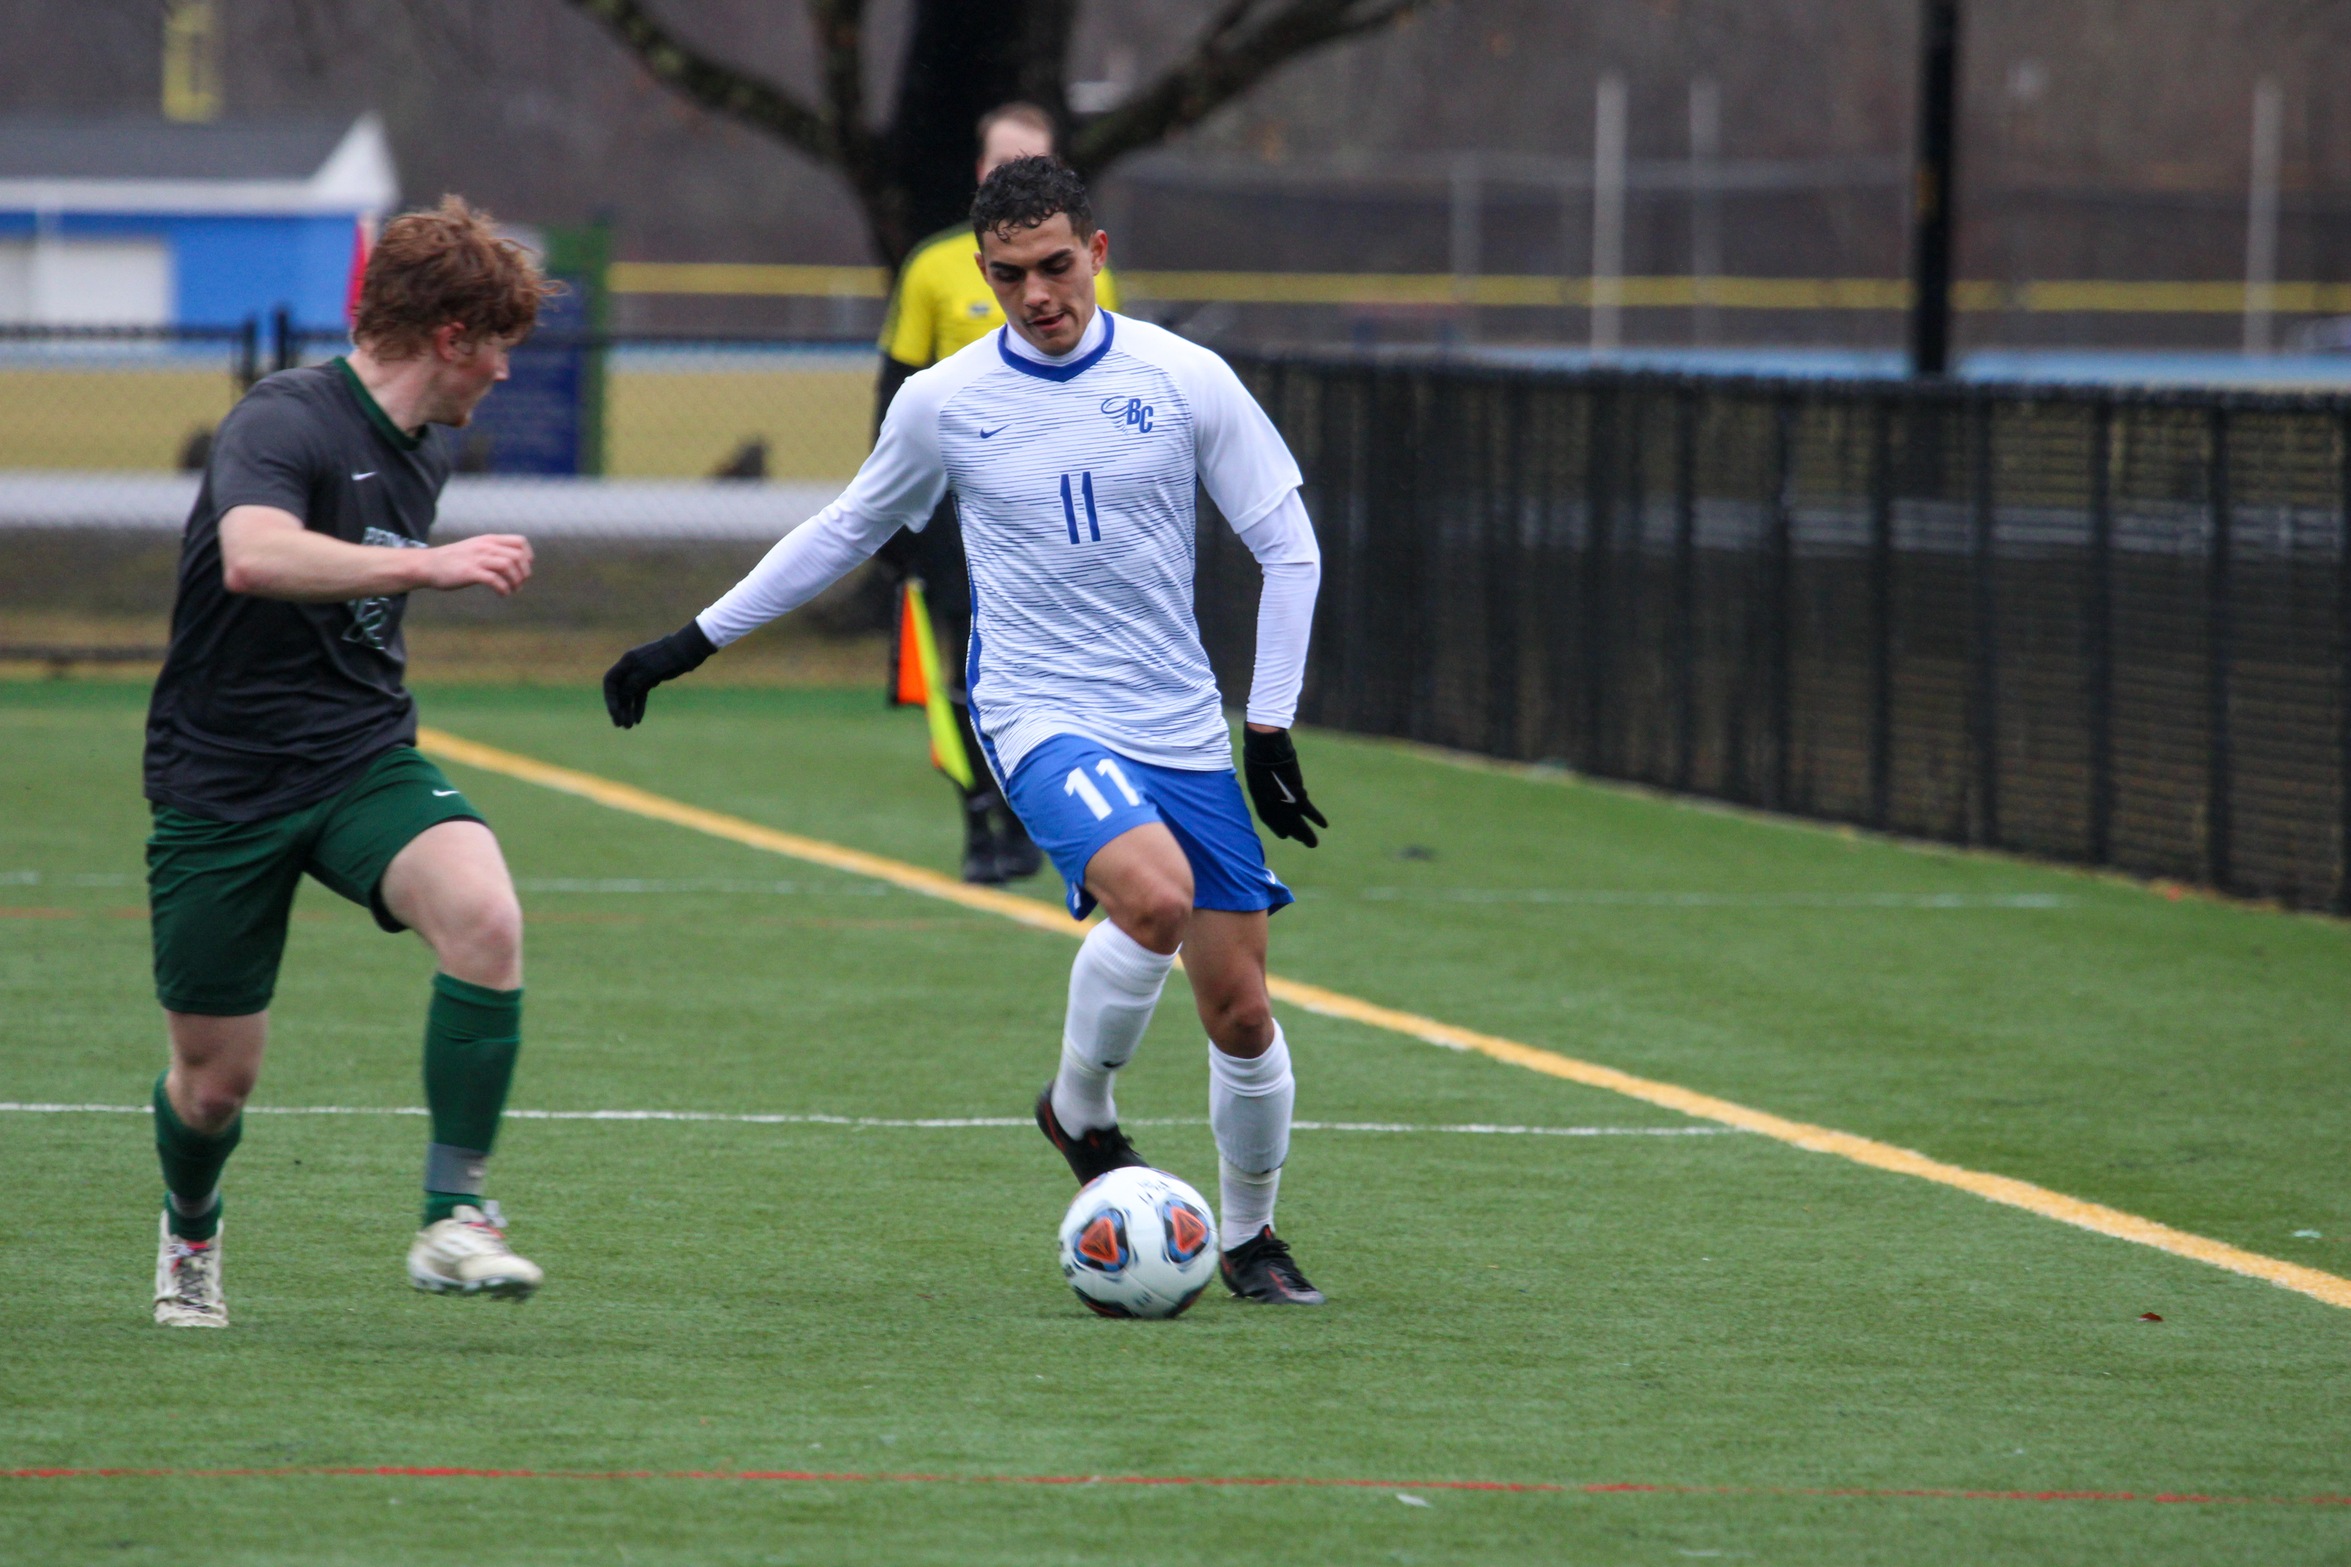 Vinicius Giannaccini scored a pair of goals and dished out an assist to help lift the Tornados past Berea on Sunday (Photo courtesy of Brianna Rodibaugh '24).